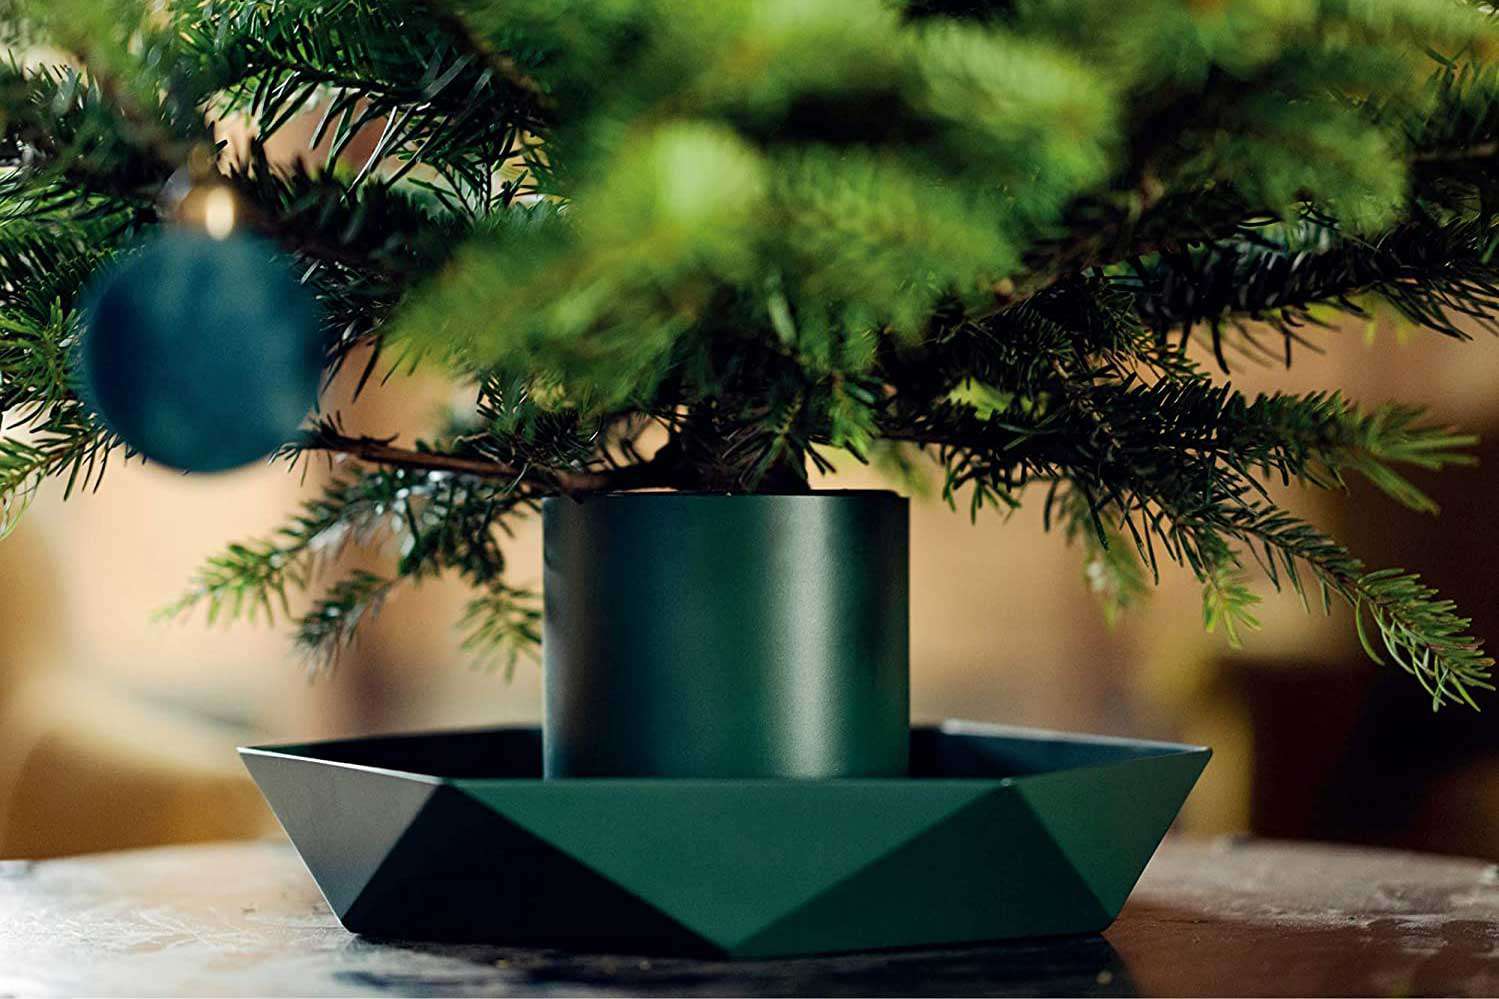 Essential Christmas Tree Stand/Base With Water Reservoir Green